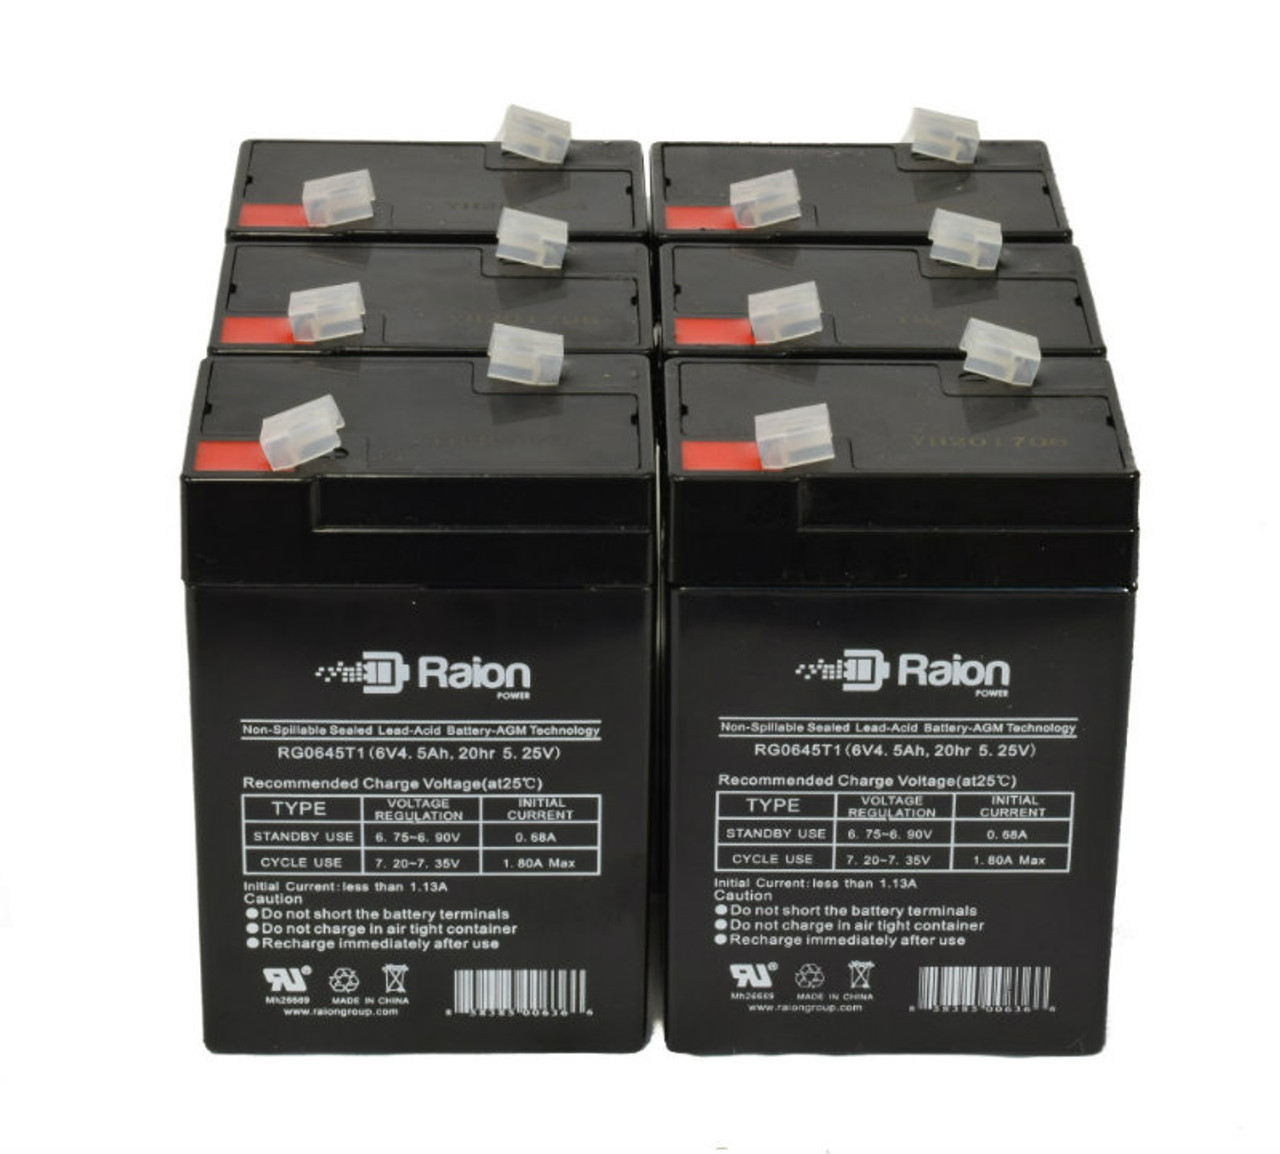 Raion Power 6 Volt 4.5Ah RG0645T1 Replacement Battery for Kaiying KS3-6A - 6 Pack